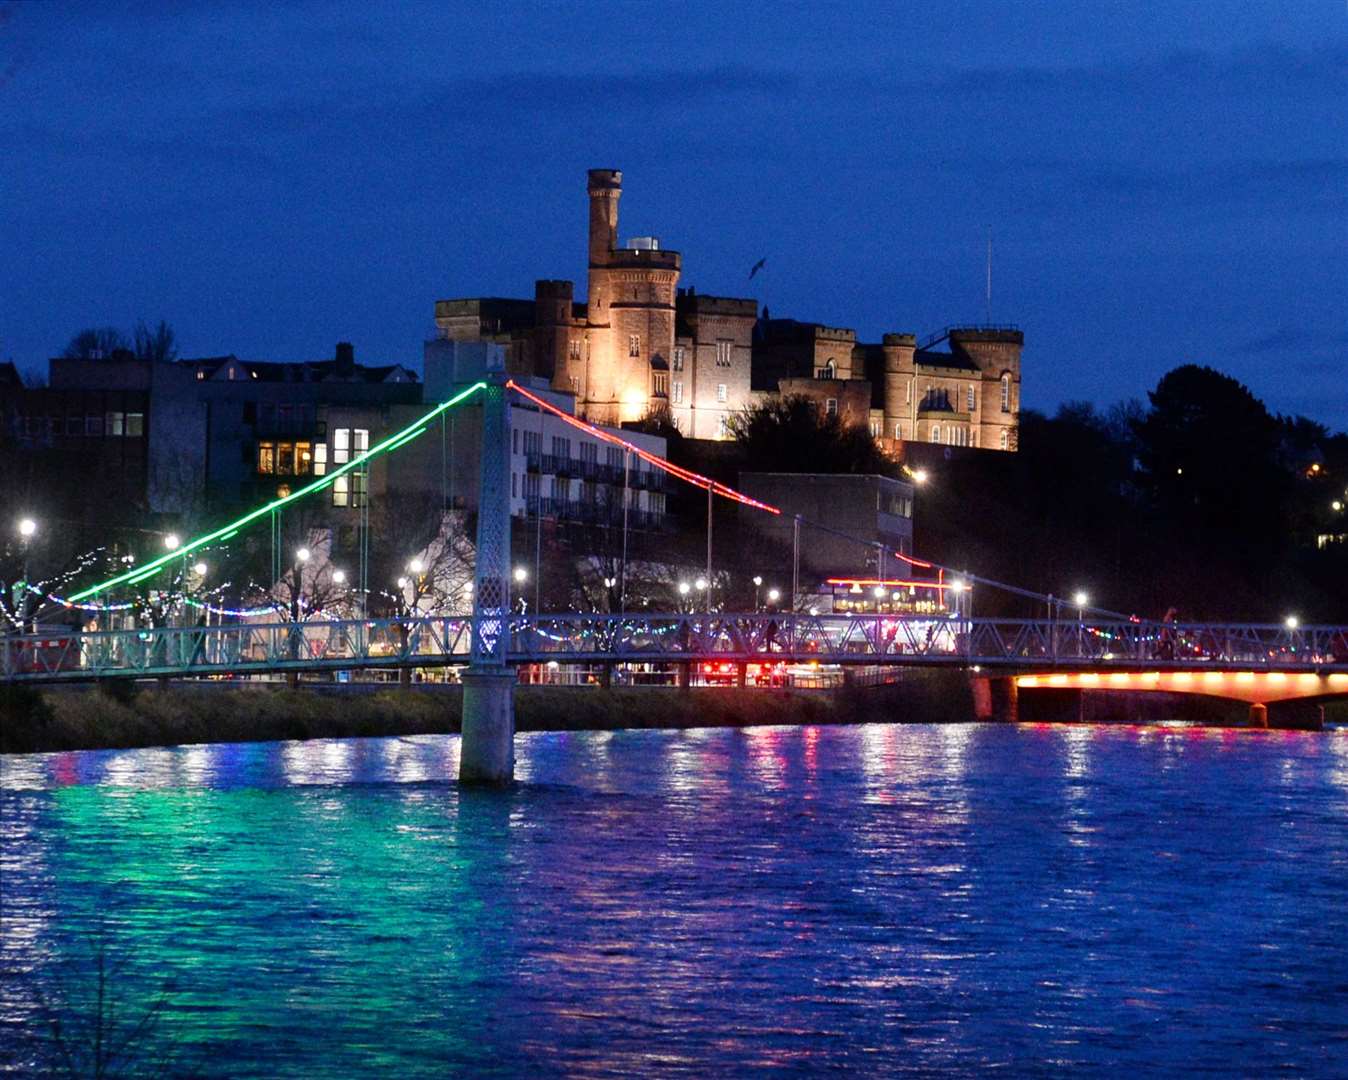 The River Ness and Inverness Castle at night.